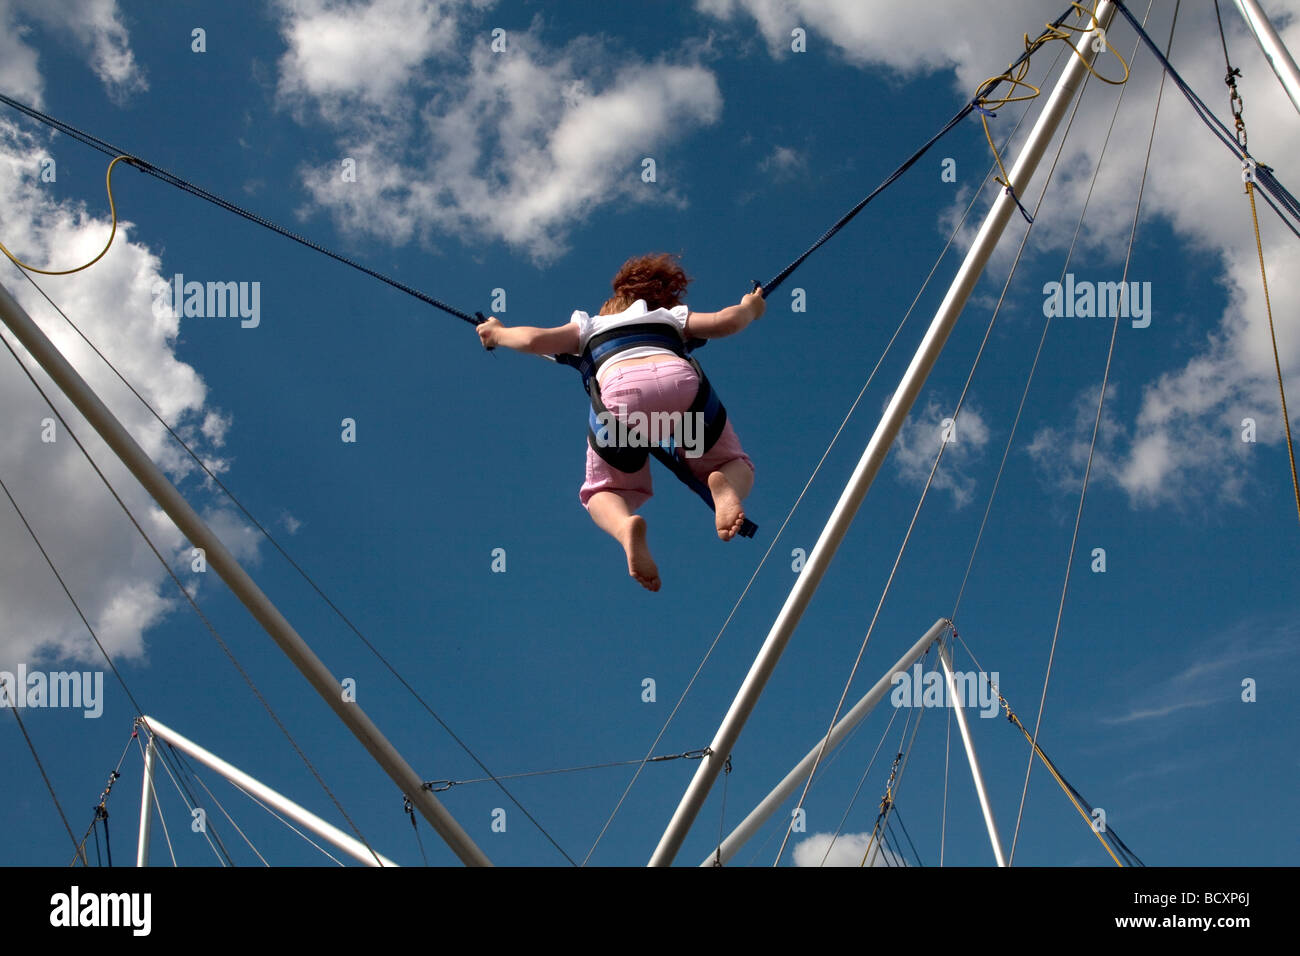 A young red haired girl enjoys a trampoline ride under blue skies at the 5th Colchester Military Festival in Essex, England Stock Photo